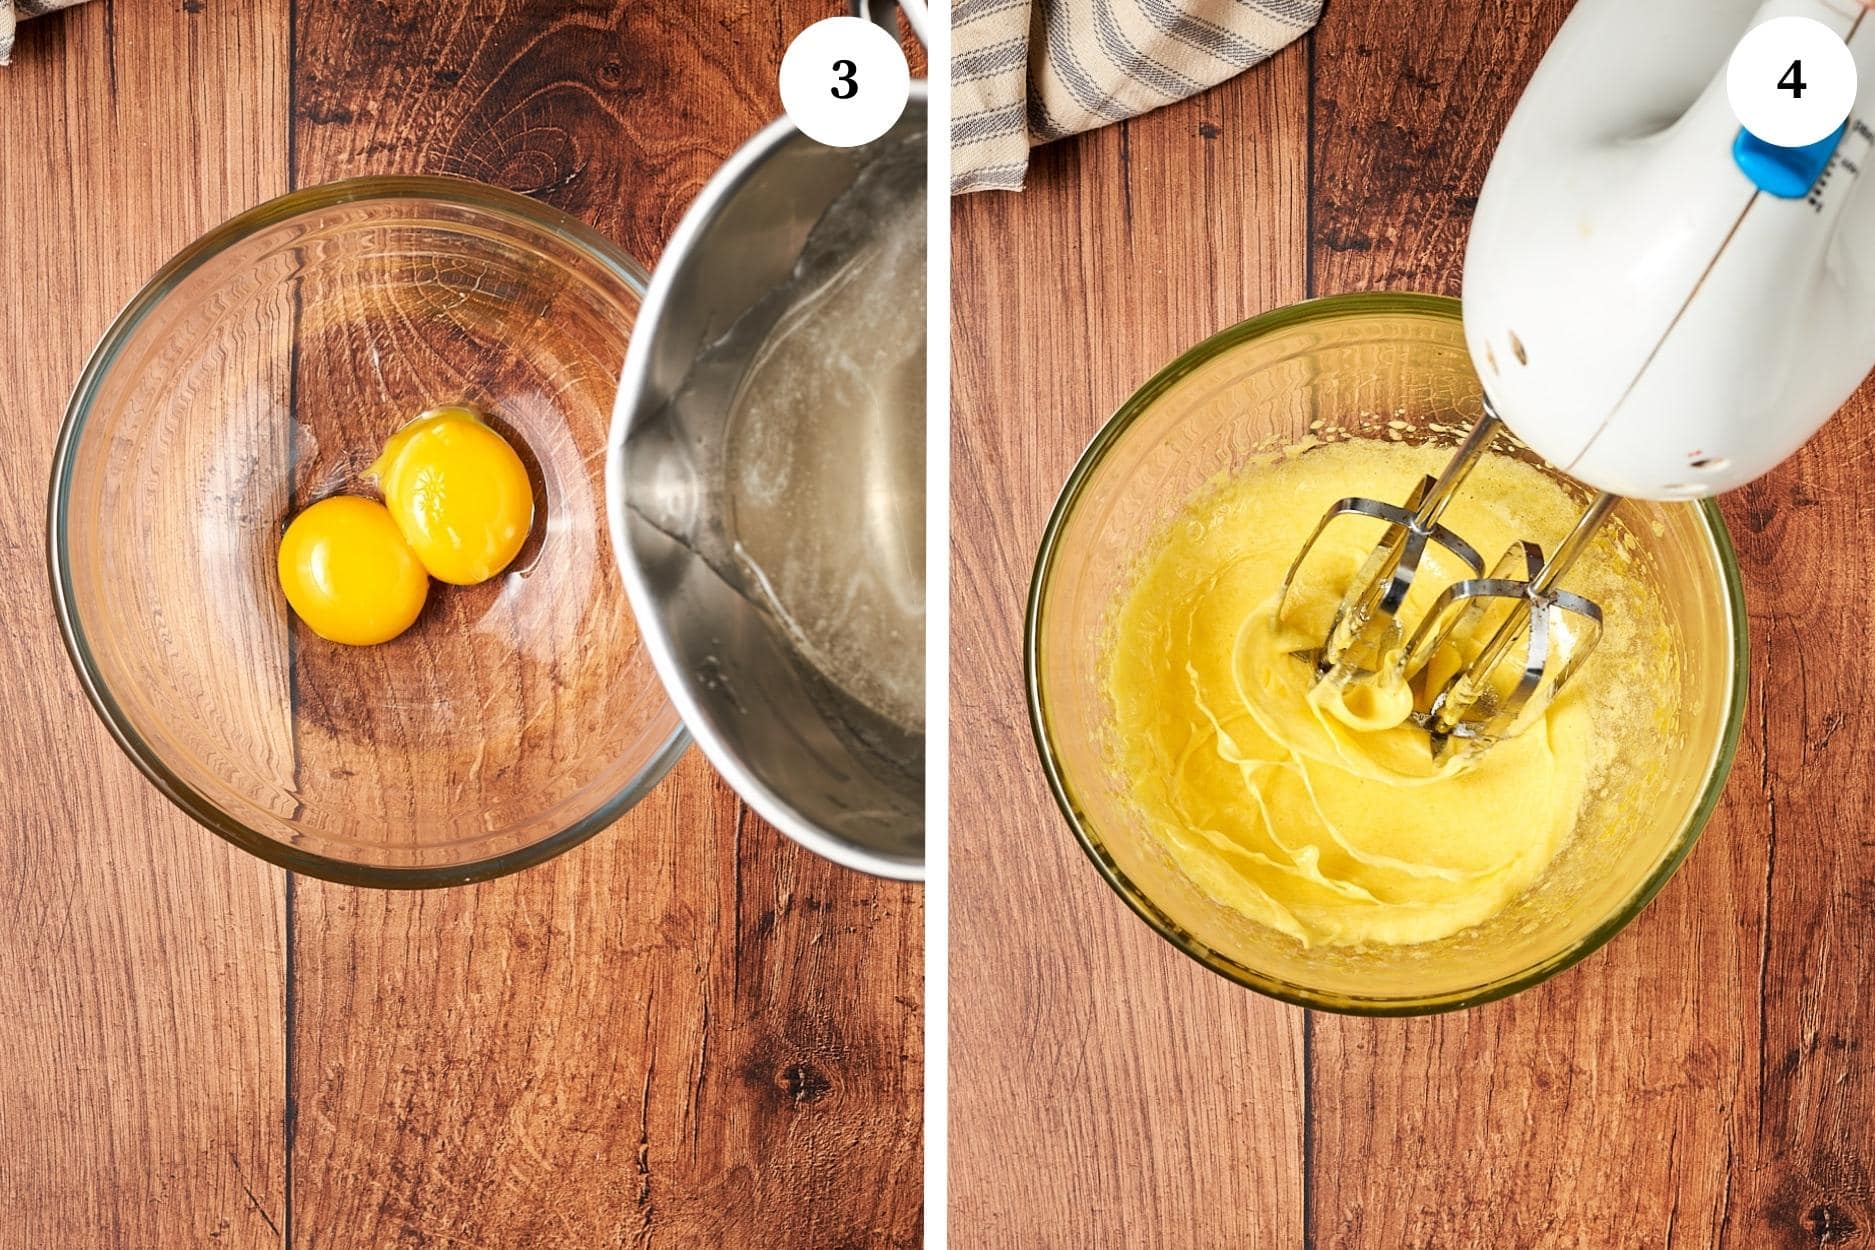 steps for making italian mascarpone cream: pour the dissolved sugar with the egg yolks, then beat the eggs for 5 minutes